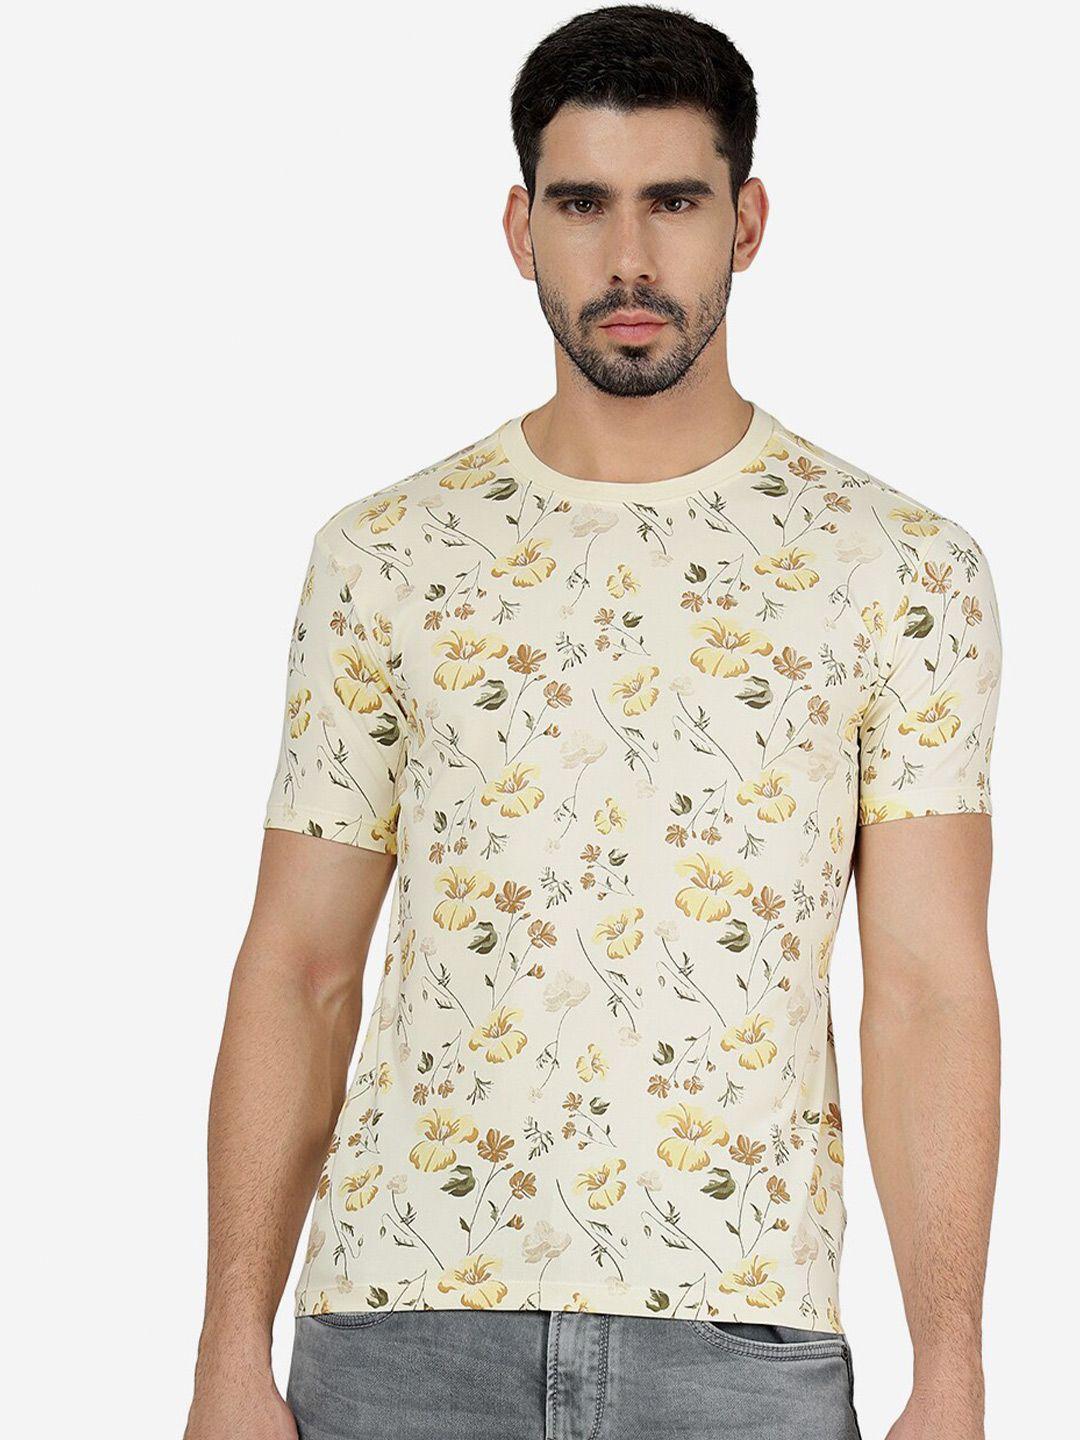 jade-blue-floral-printed-slim-fit-round-neck-pure-cotton-t-shirt